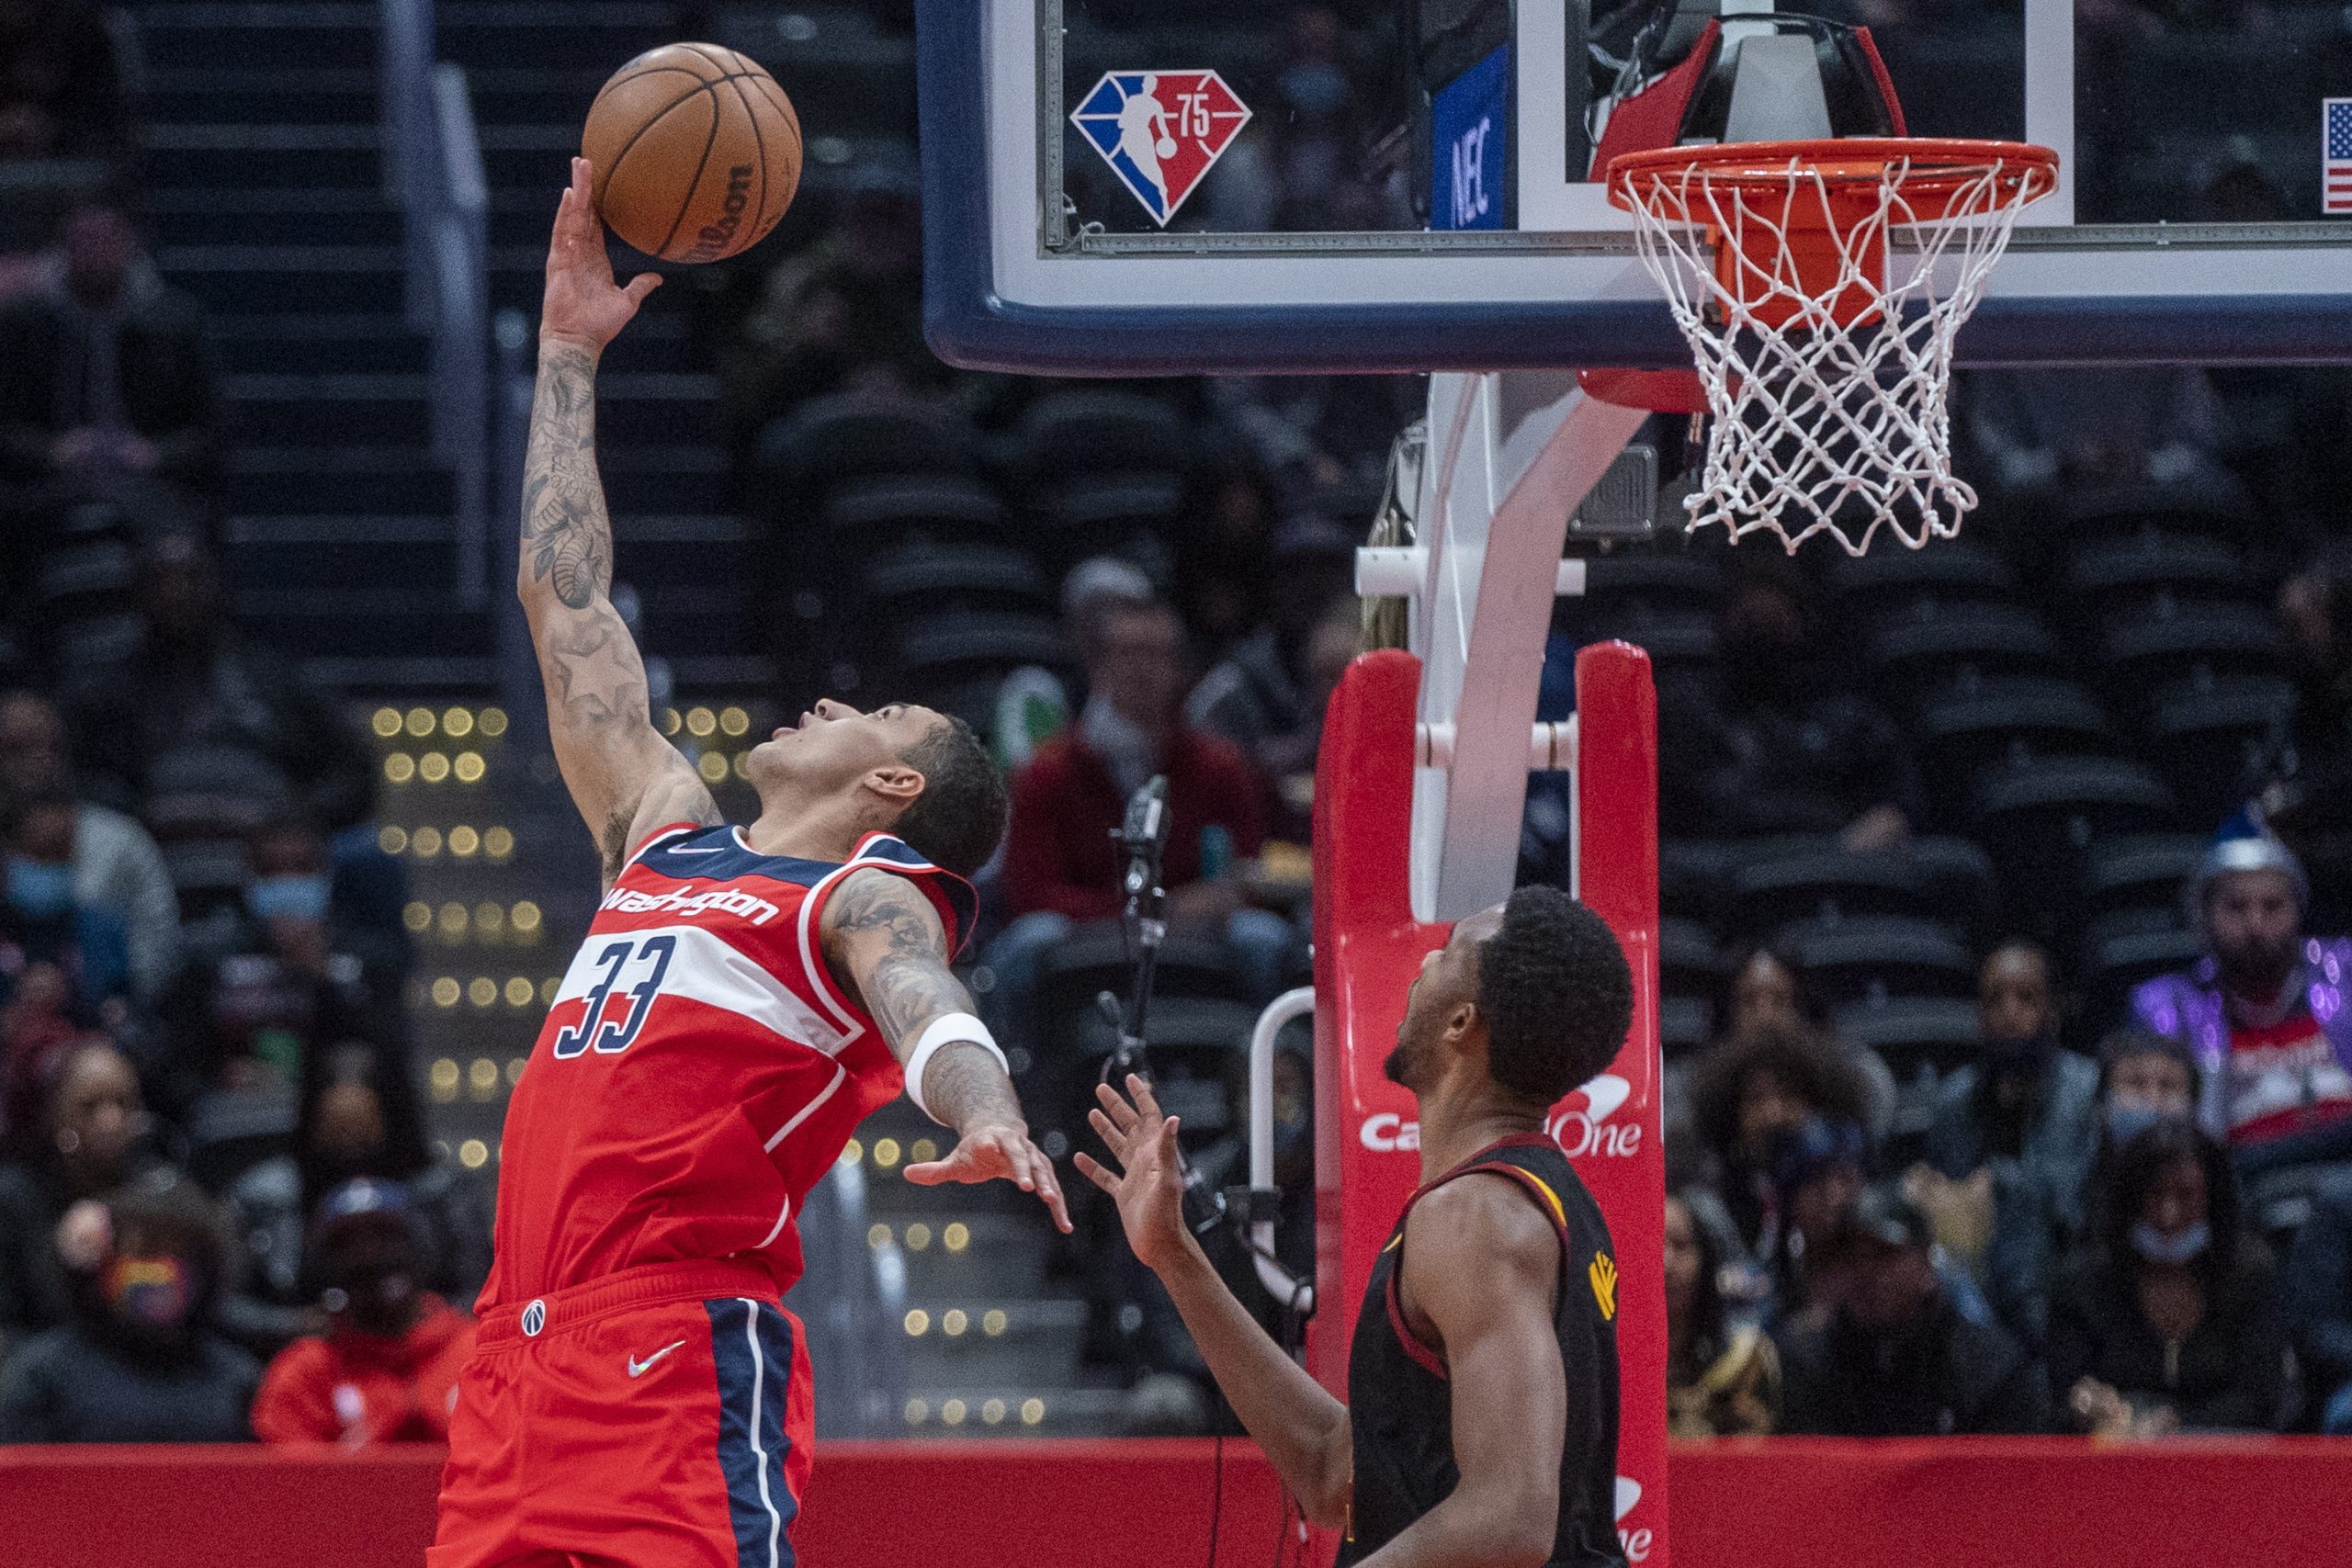 epa09620003 Washington Wizards forward Kyle Kuzma (L) in action against the Cleveland Cavaliers defense during the NBA basketball game between the Cleveland Cavaliers and the Washington Wizards at Capital One Arena in Washington, DC, USA, 03 December 2021.  EPA/SHAWN THEW SHUTTERSTOCK OUT